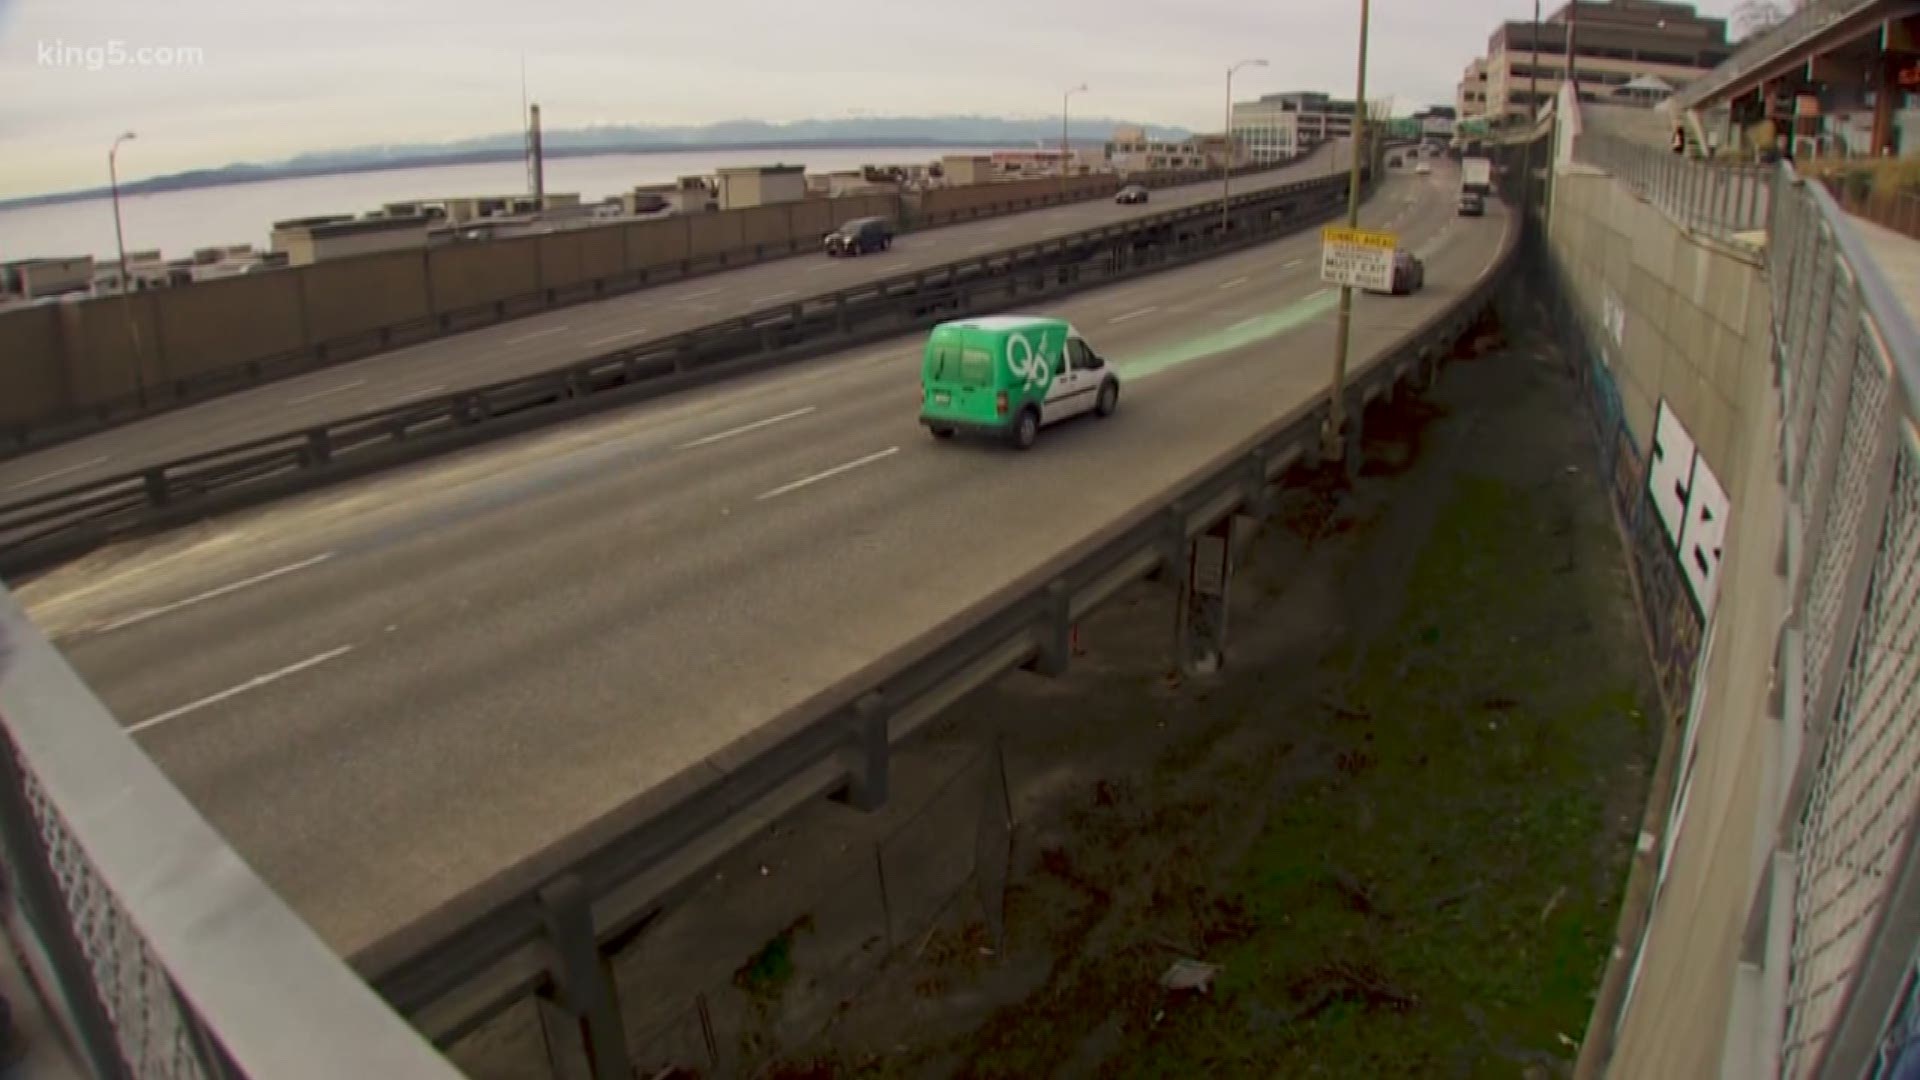 The Seattle viaduct brought out a flood of traffic and memories on Friday. The overlook at Pike Place Market was crowded with people attempting to get a last picture or capture a last moment of the concrete monolith. KING 5’s Chris Daniels was there